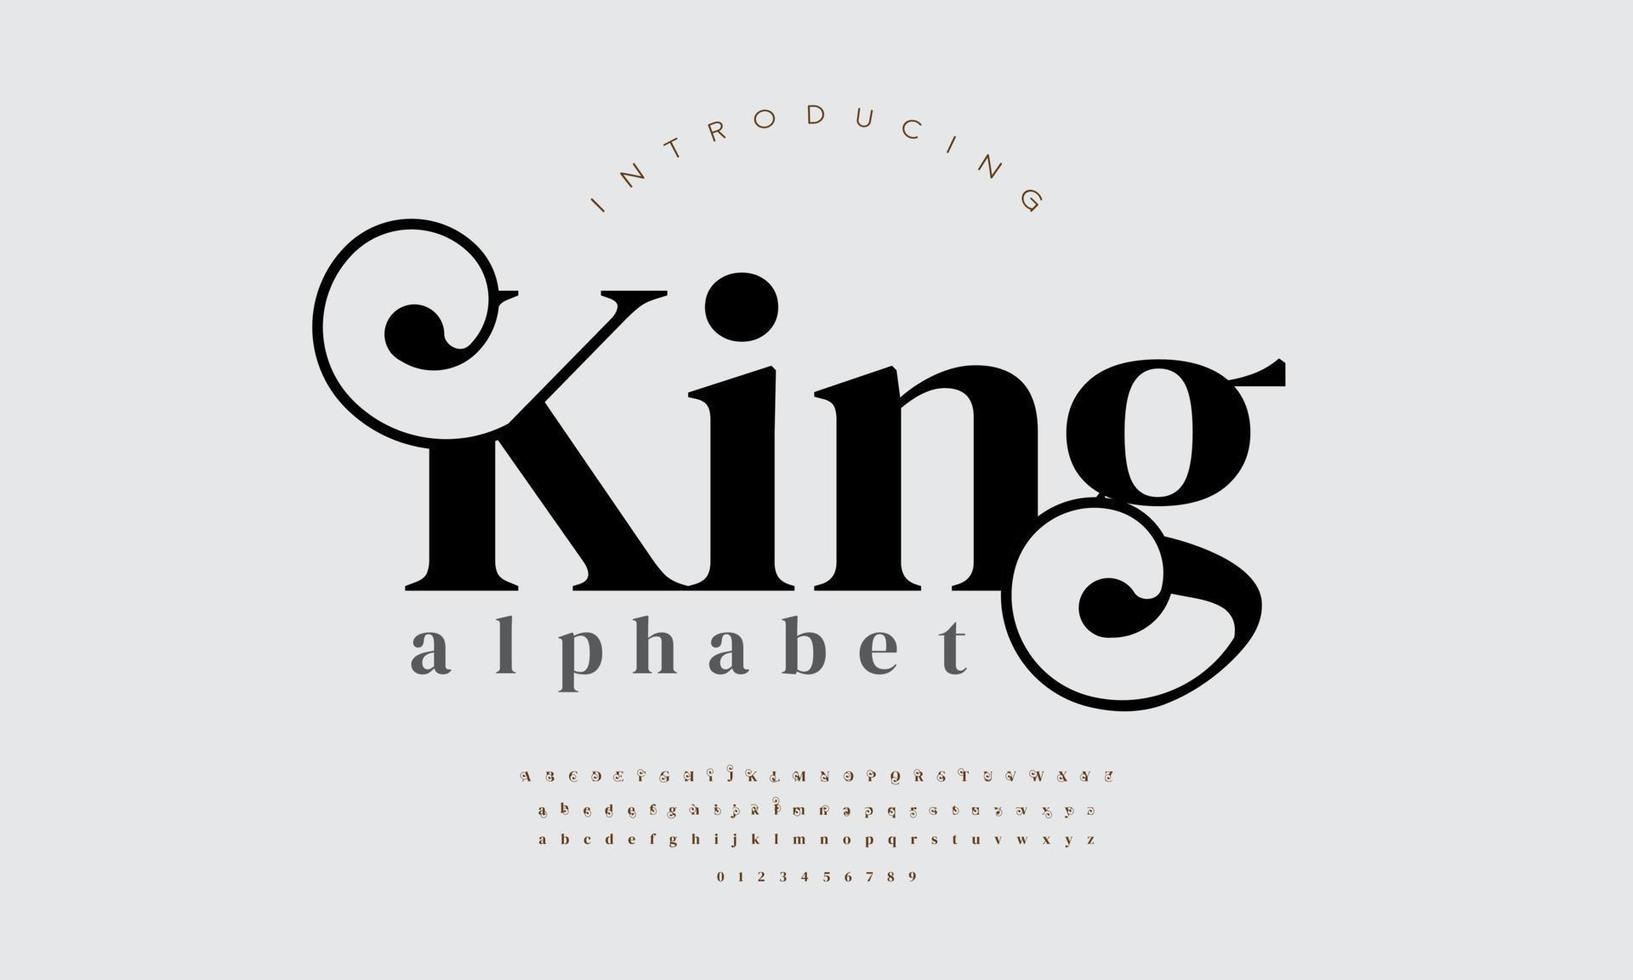 King fashion font alphabet. Minimal modern urban fonts for logo, brand etc. Typography typeface uppercase lowercase and number. vector illustration